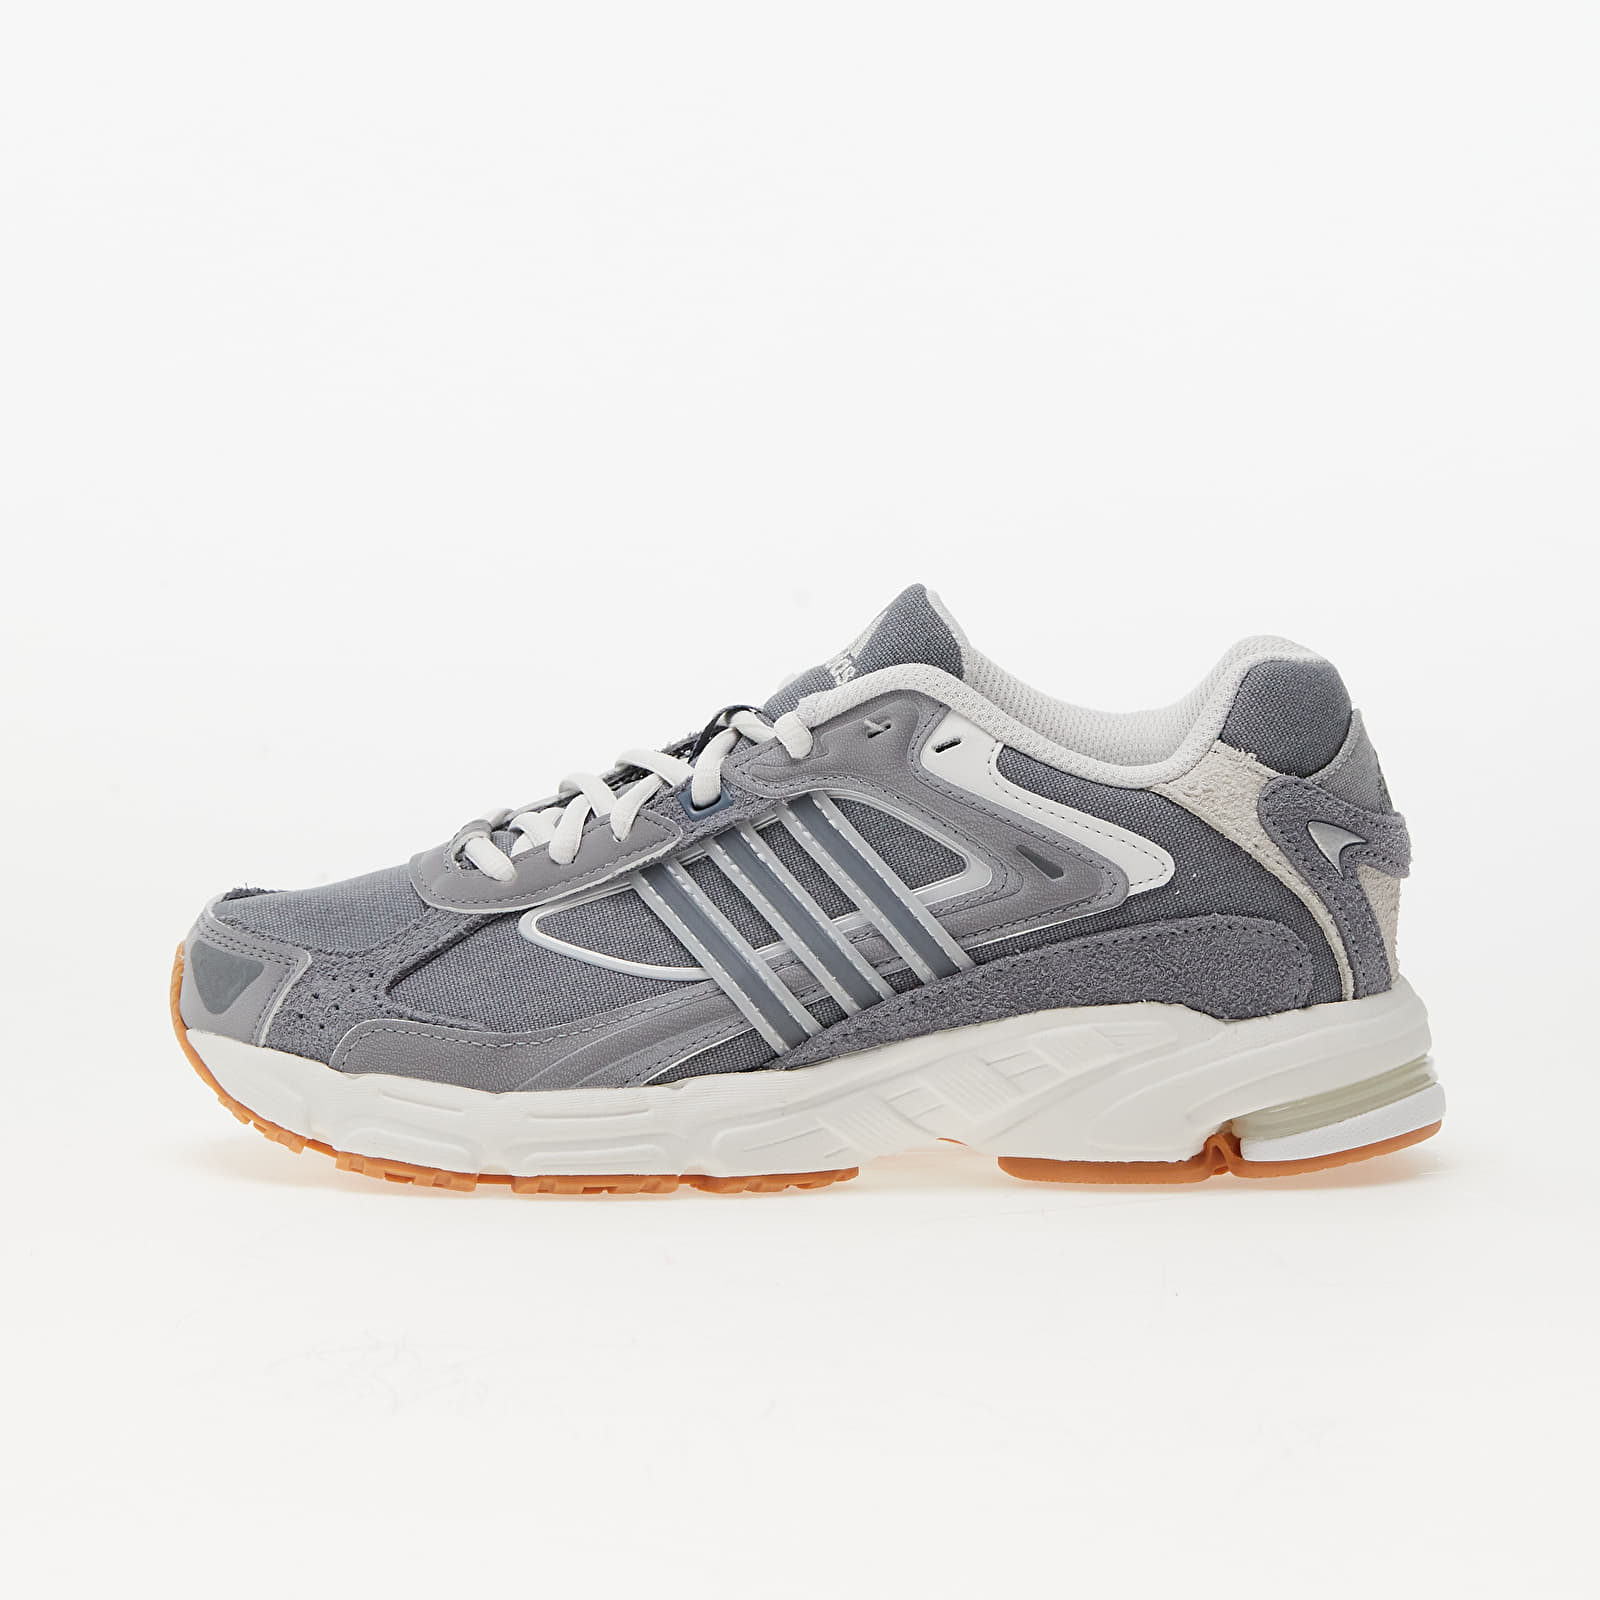 Women's shoes adidas Response Cl W Grey/ Crystal White/ Core White | Queens